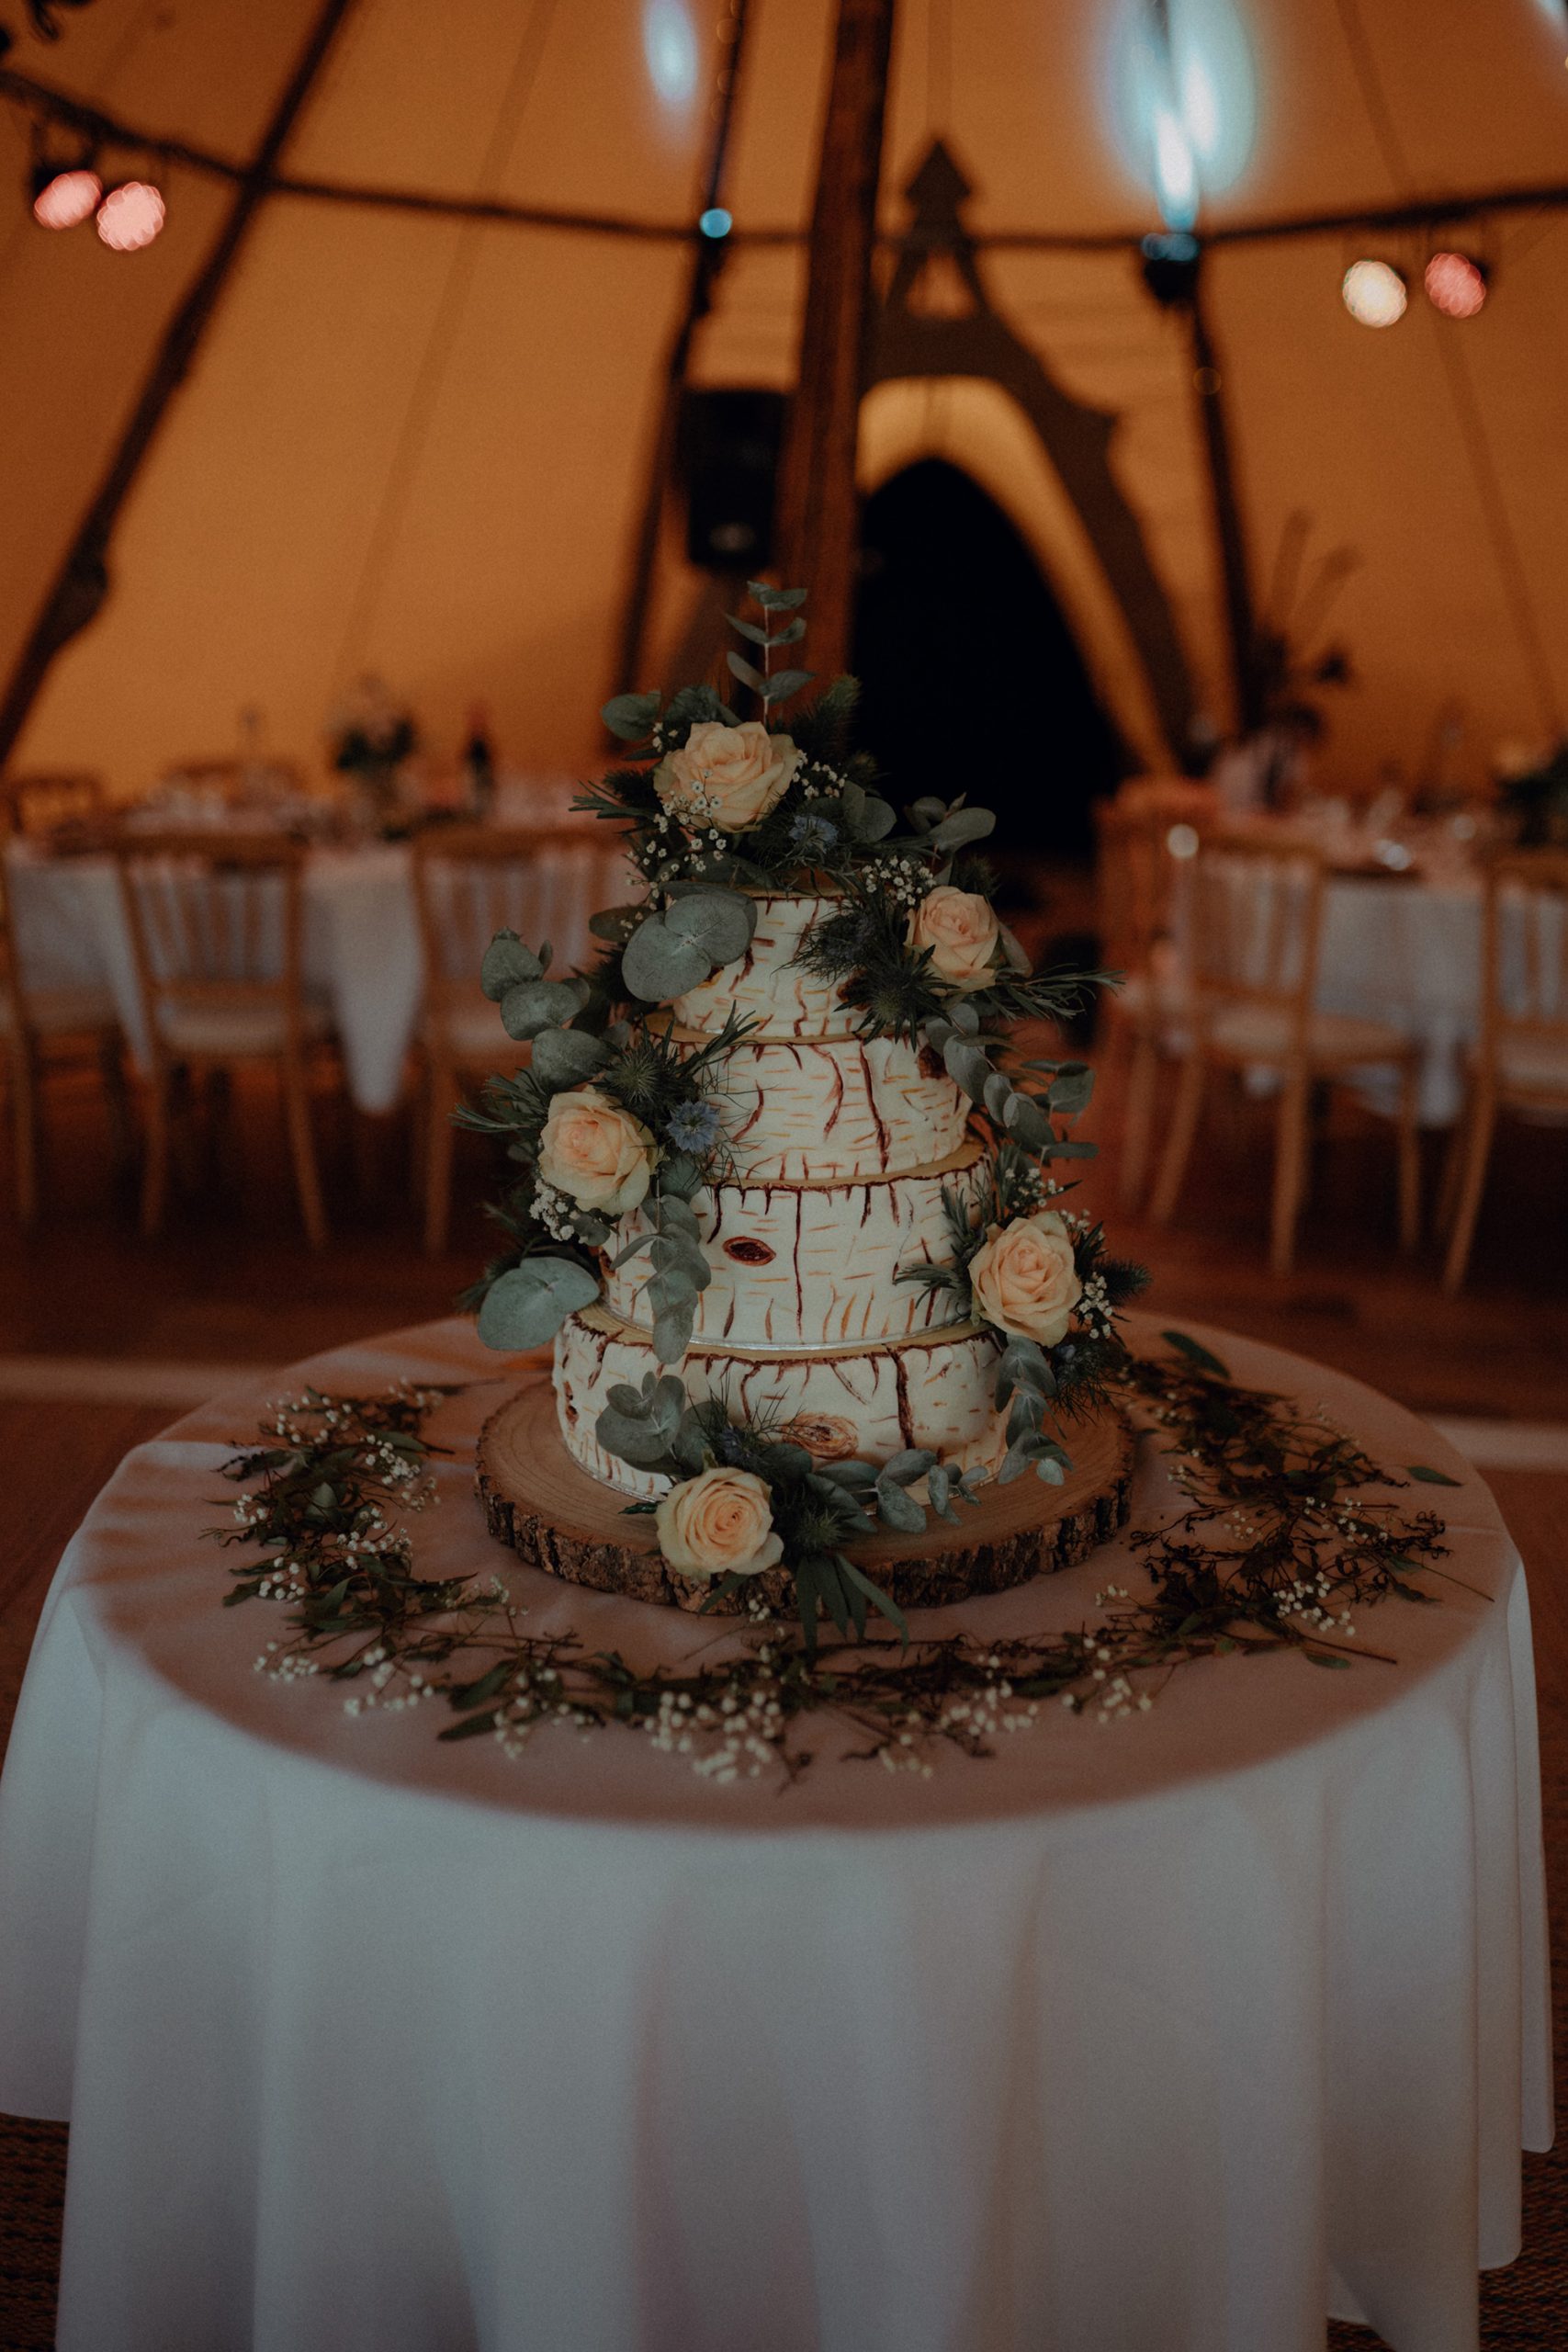 Naomi Janoux Rustic Festival Wedding Belle Art Photography SBS 018 scaled